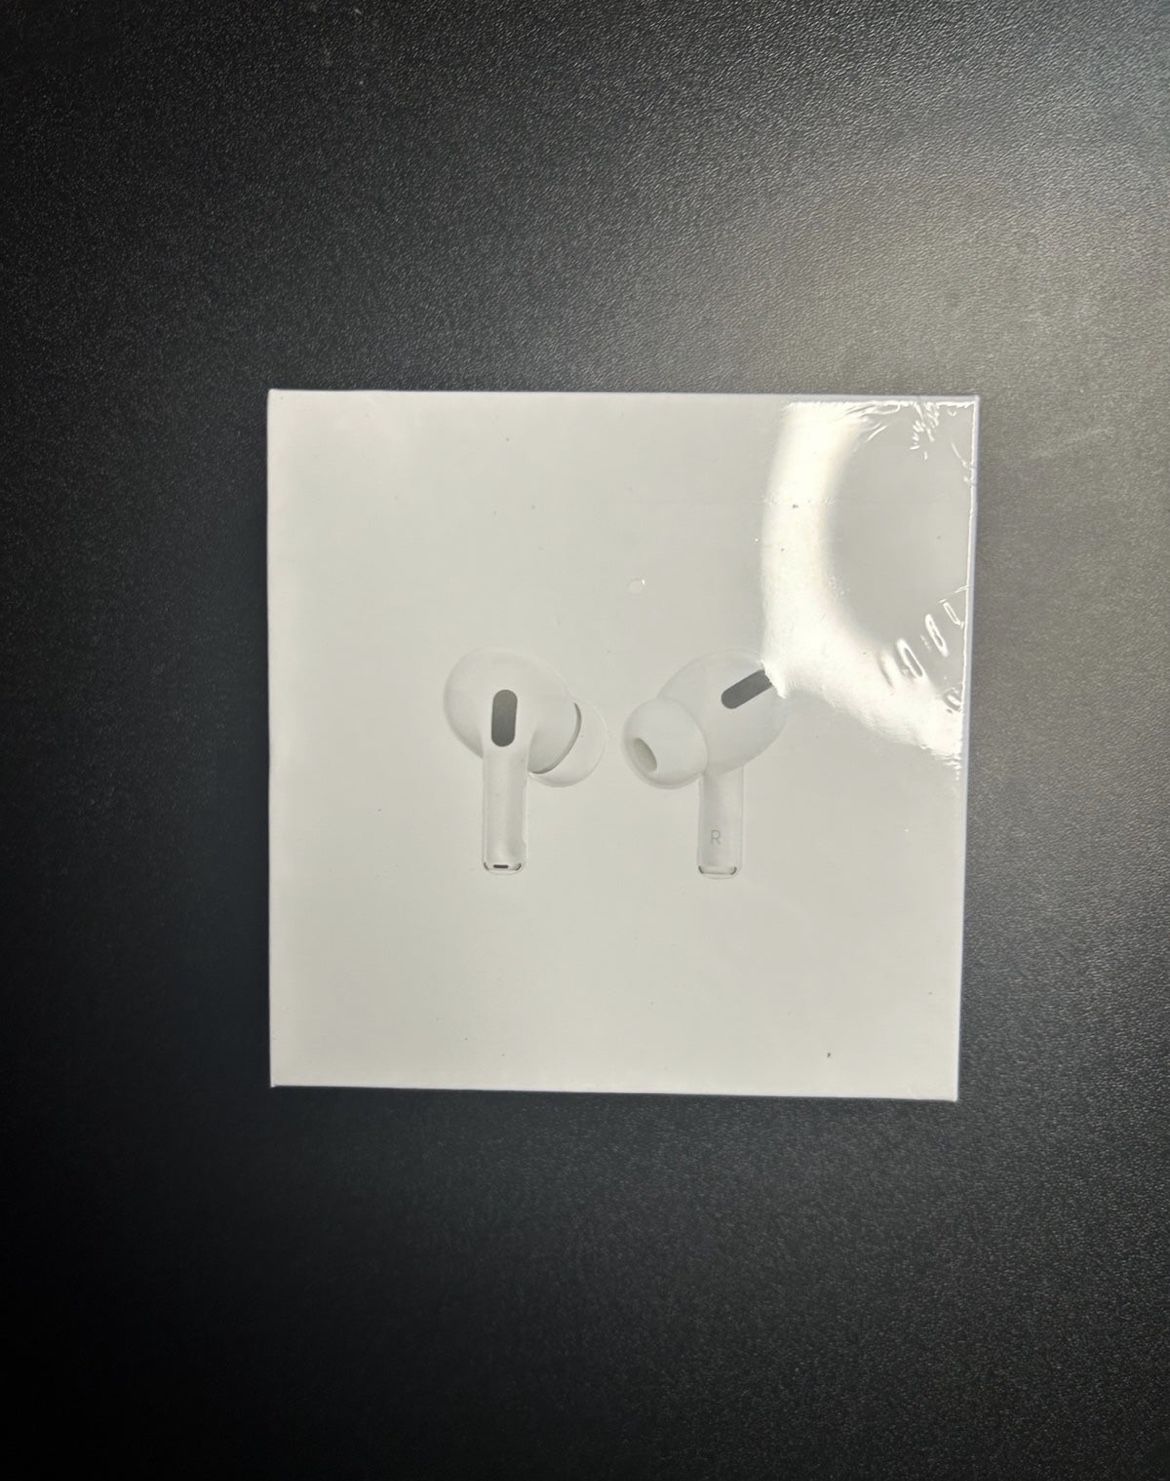 AirPods Pro’s Gen Two